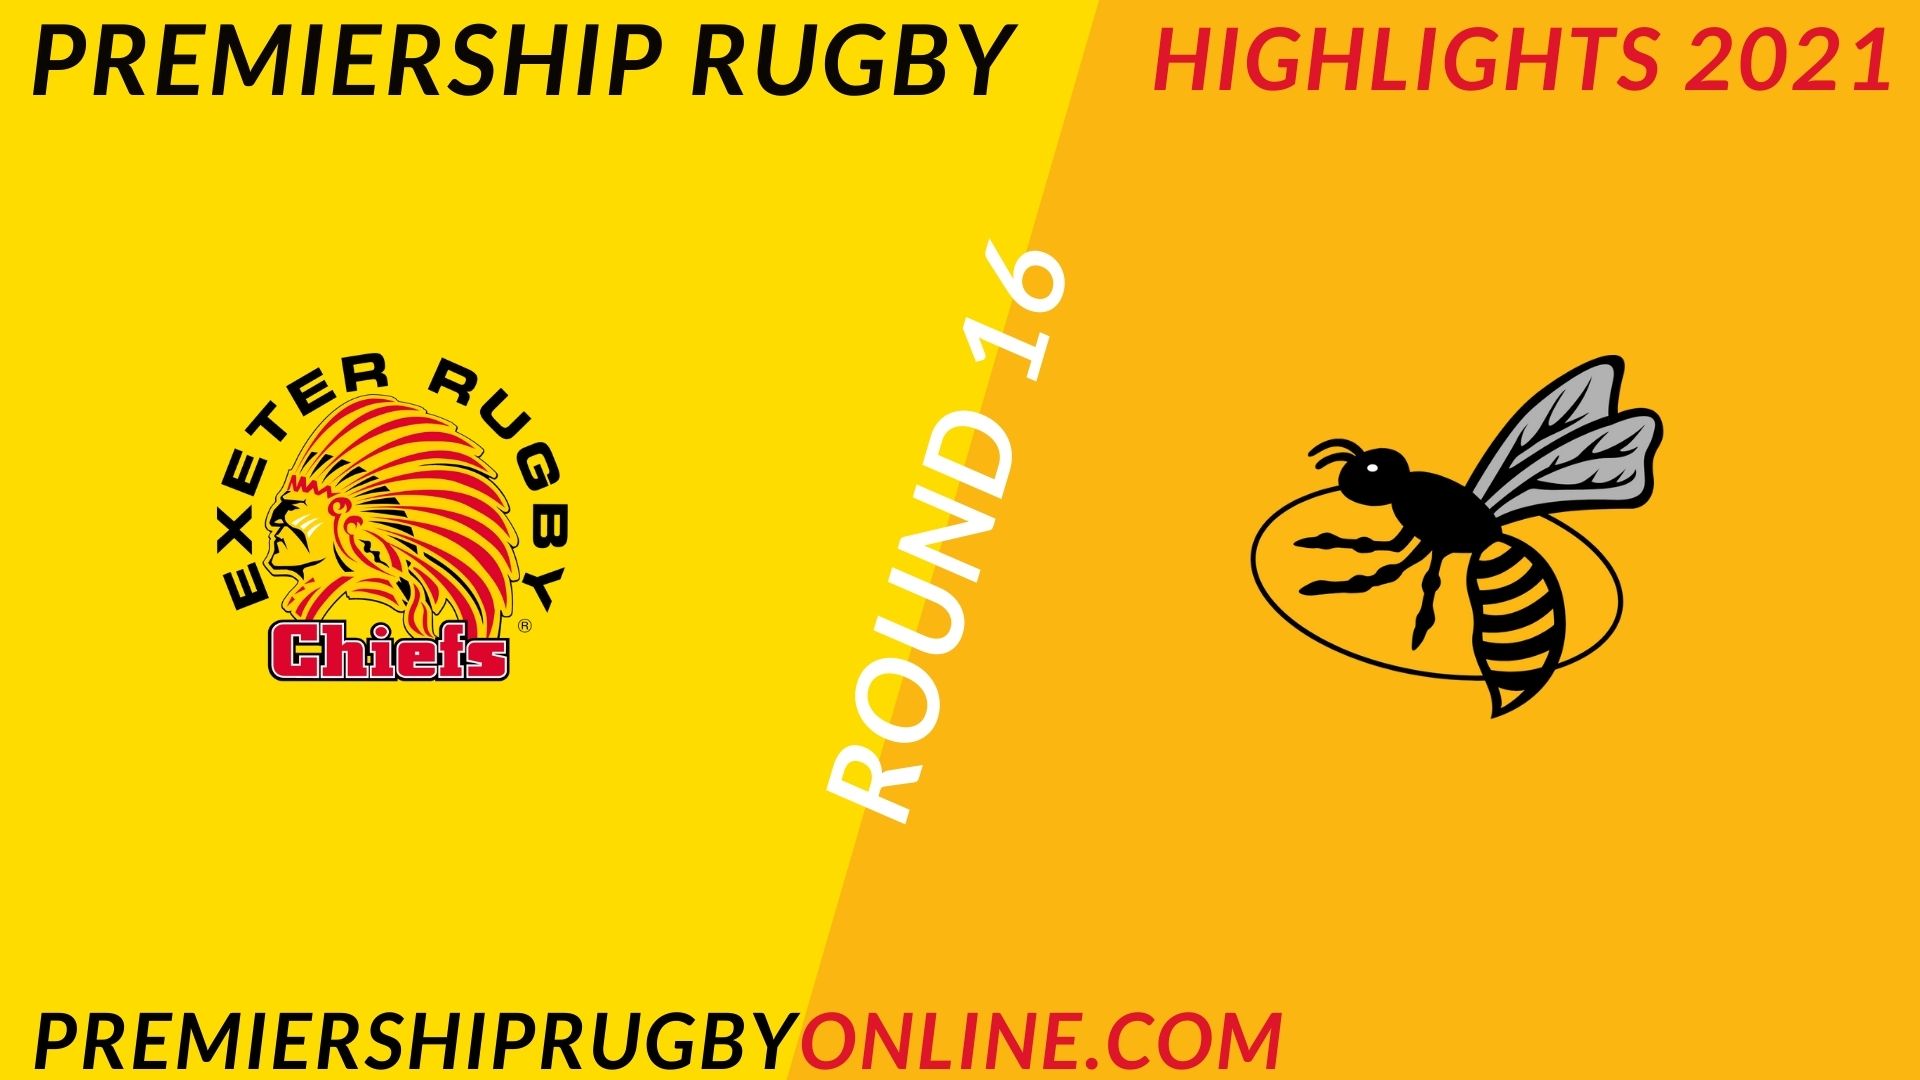 Exeter Chiefs Vs Wasps Highlights 2021 RD 16